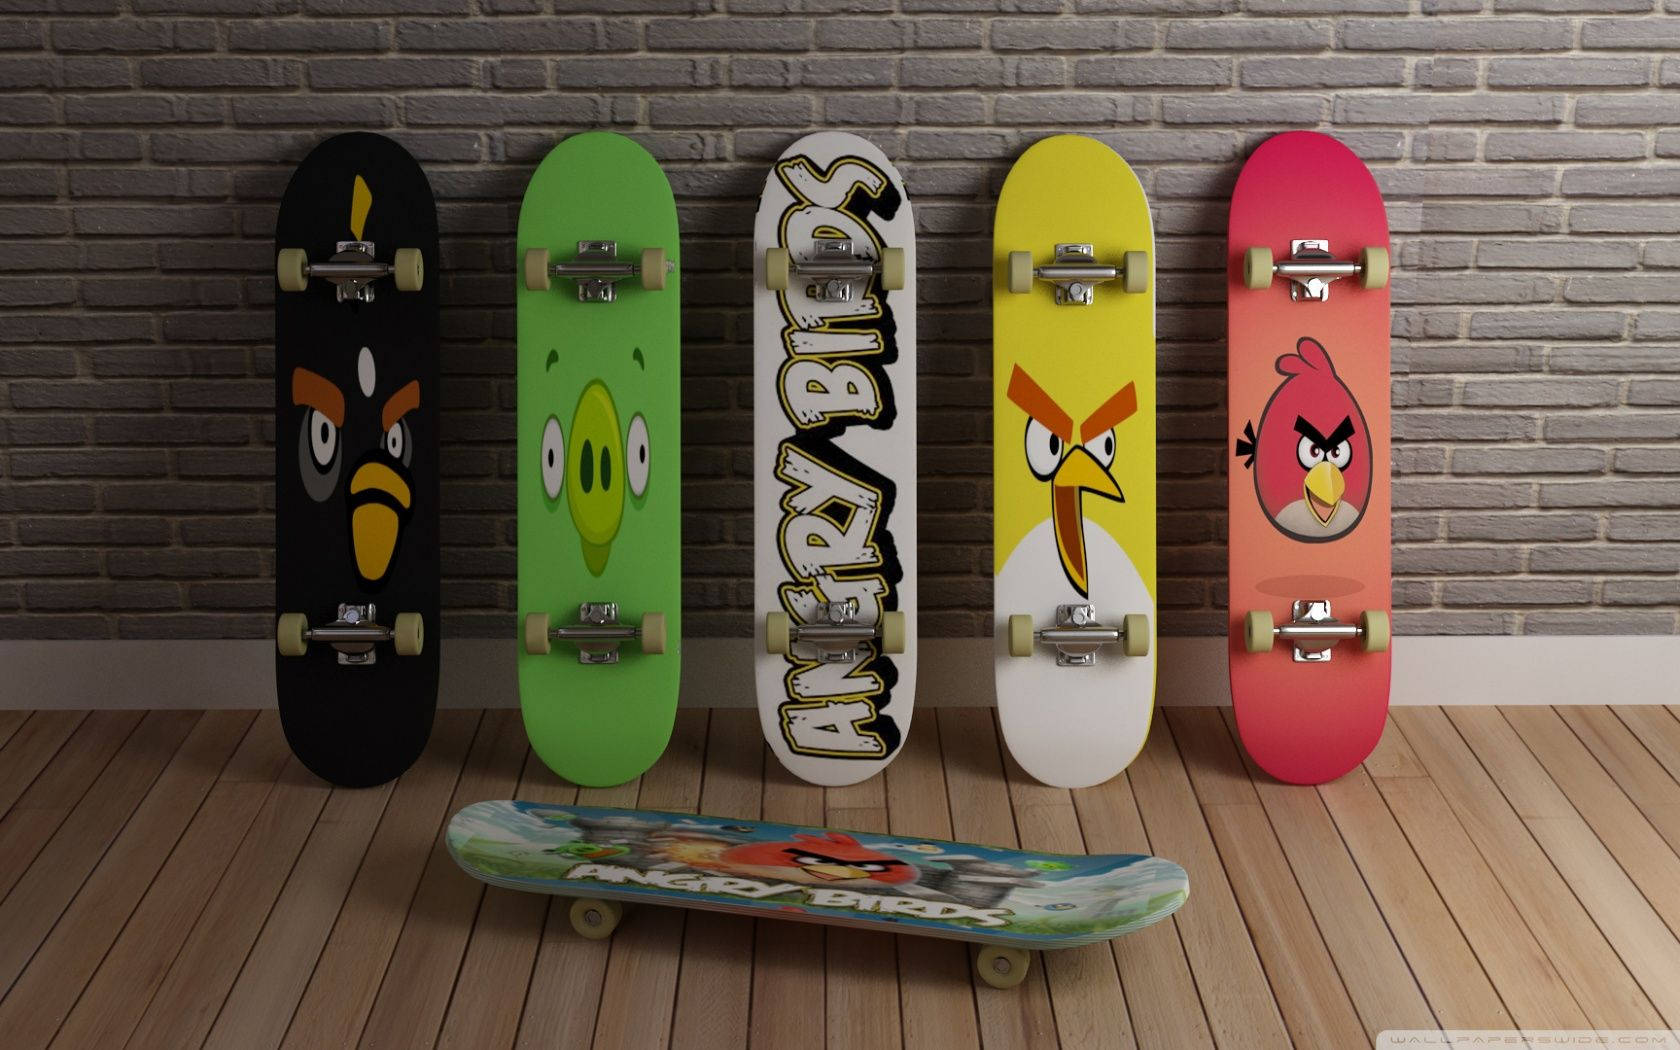 Get The Gang Together & Drift Away On Angry Birds Skateboards